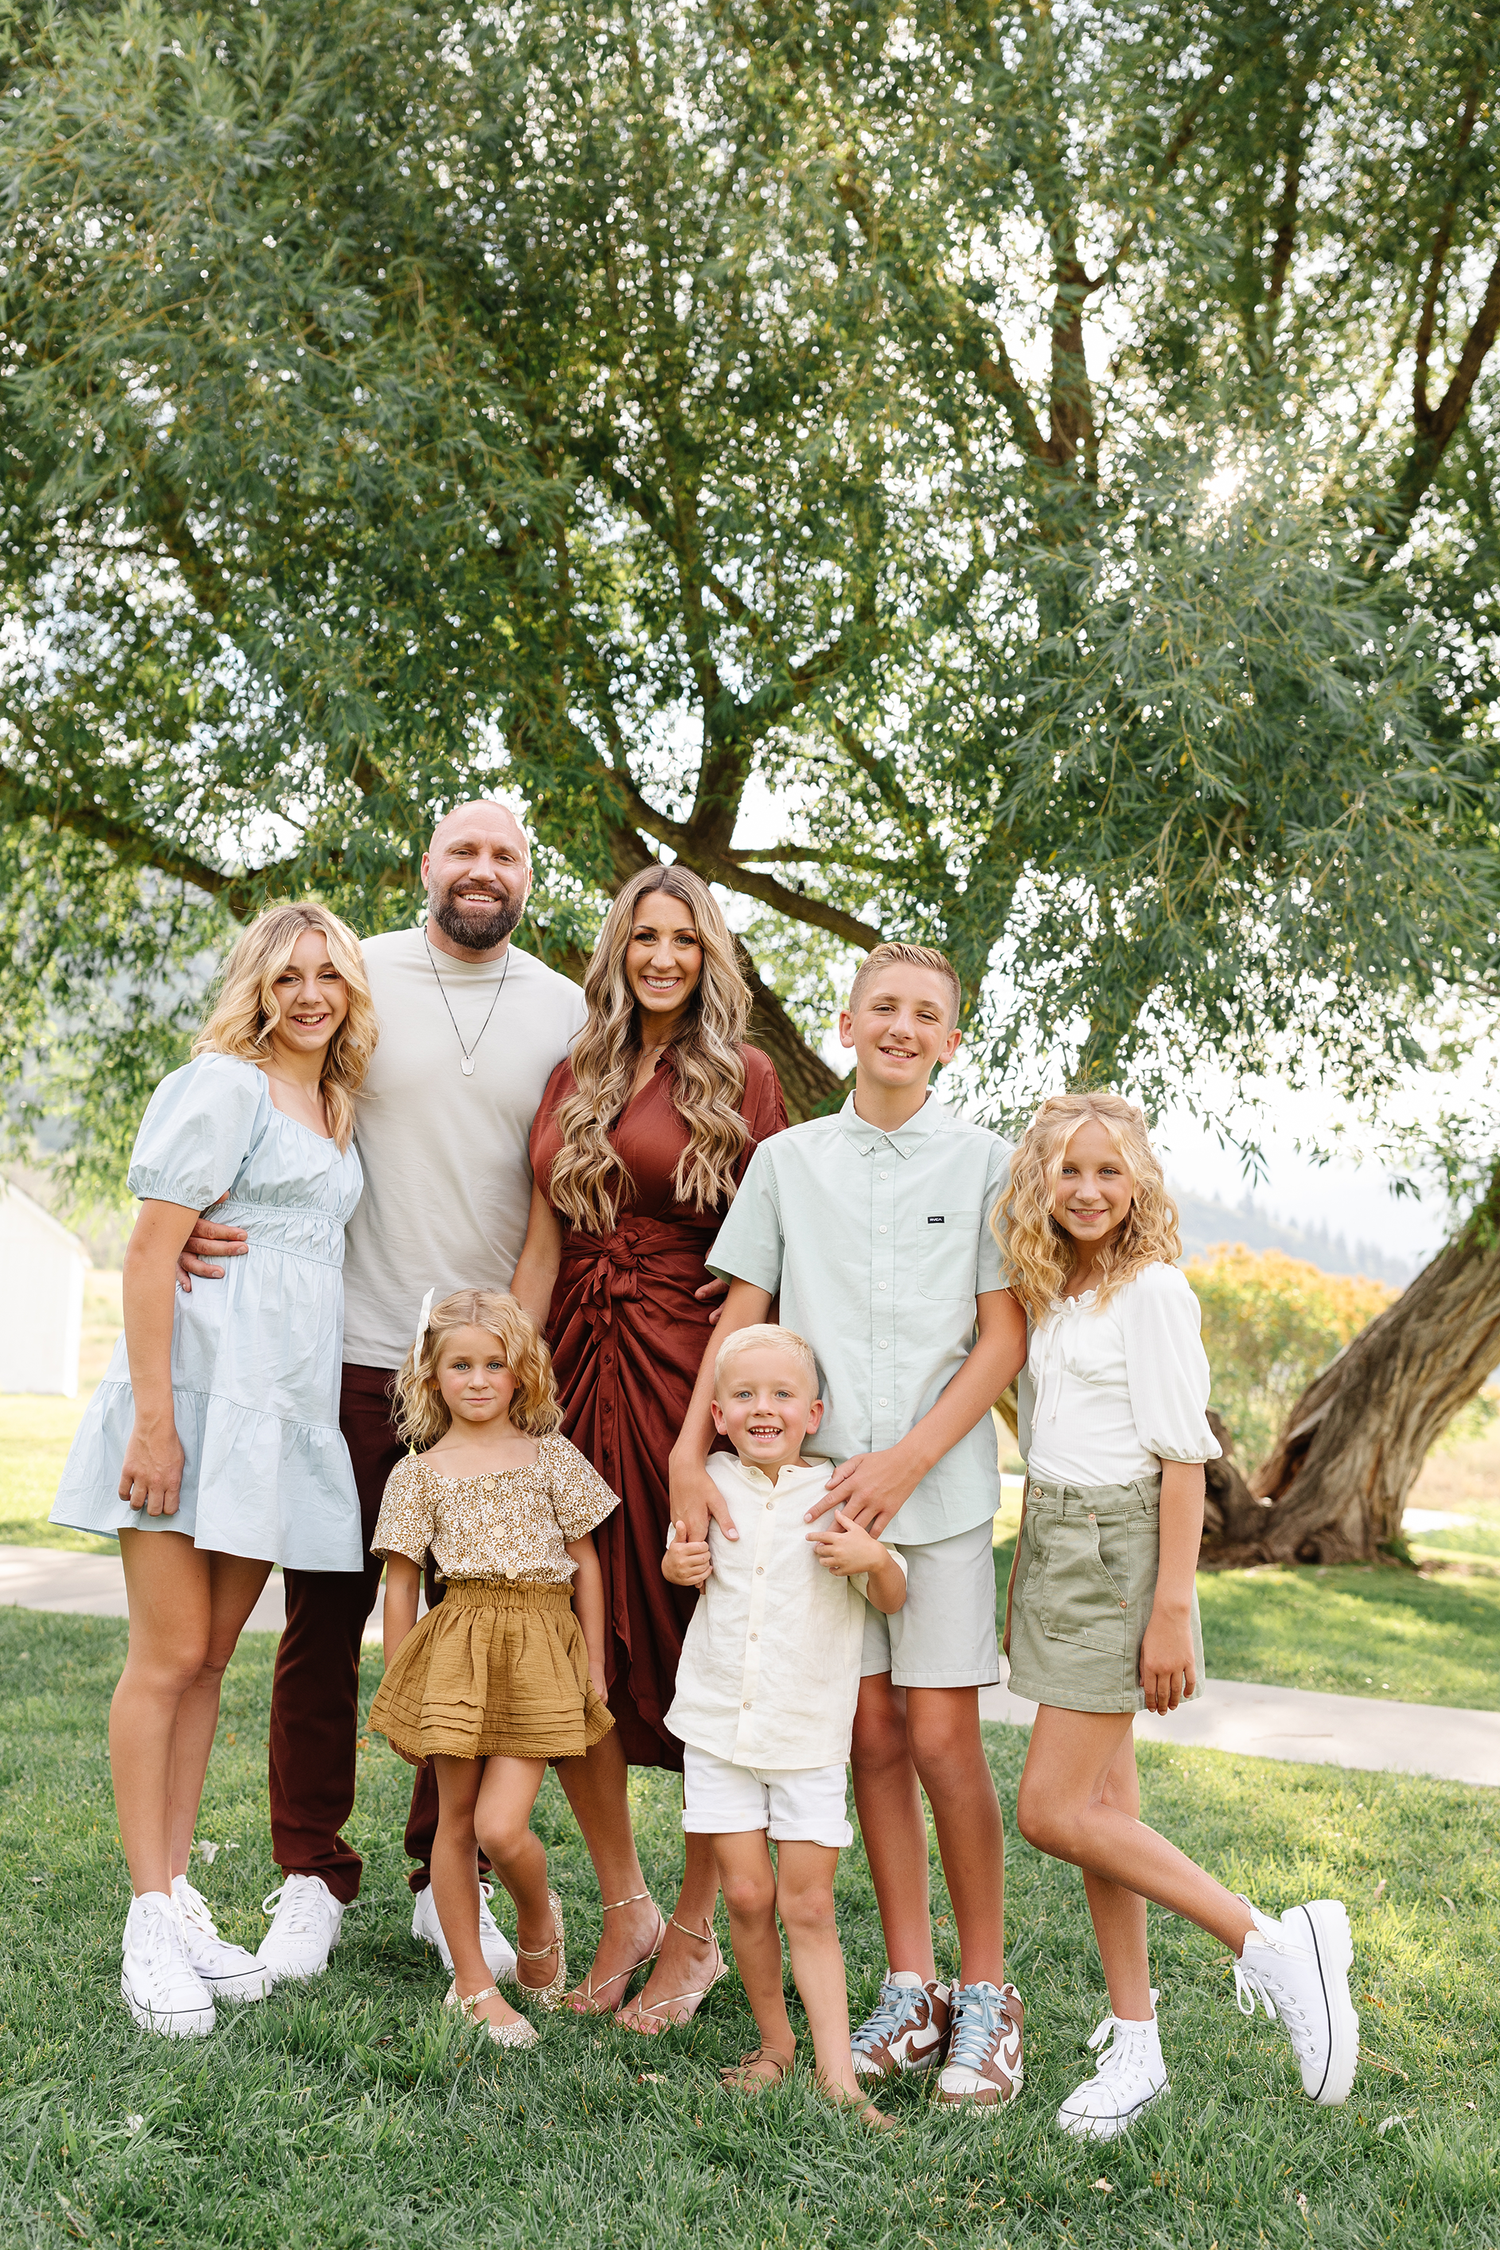 Kevin and Janae Cox with their five children standing under a tree while taking family pictures.